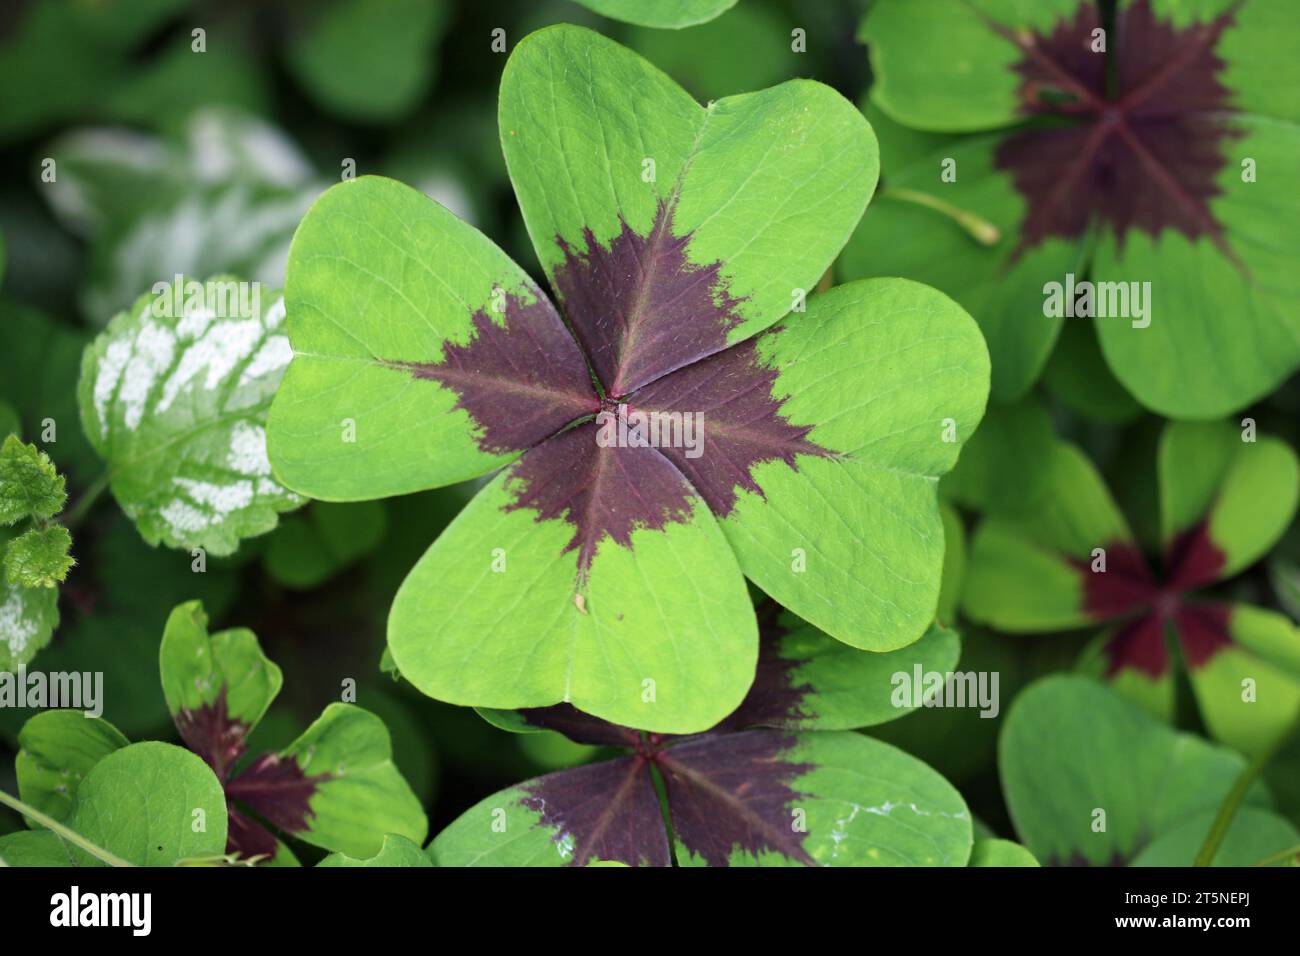 Variegated green and dark purple four leaf lucky clover, Oxalis tetraphylla, leaf in close up with a background of blurred leaves. Stock Photo